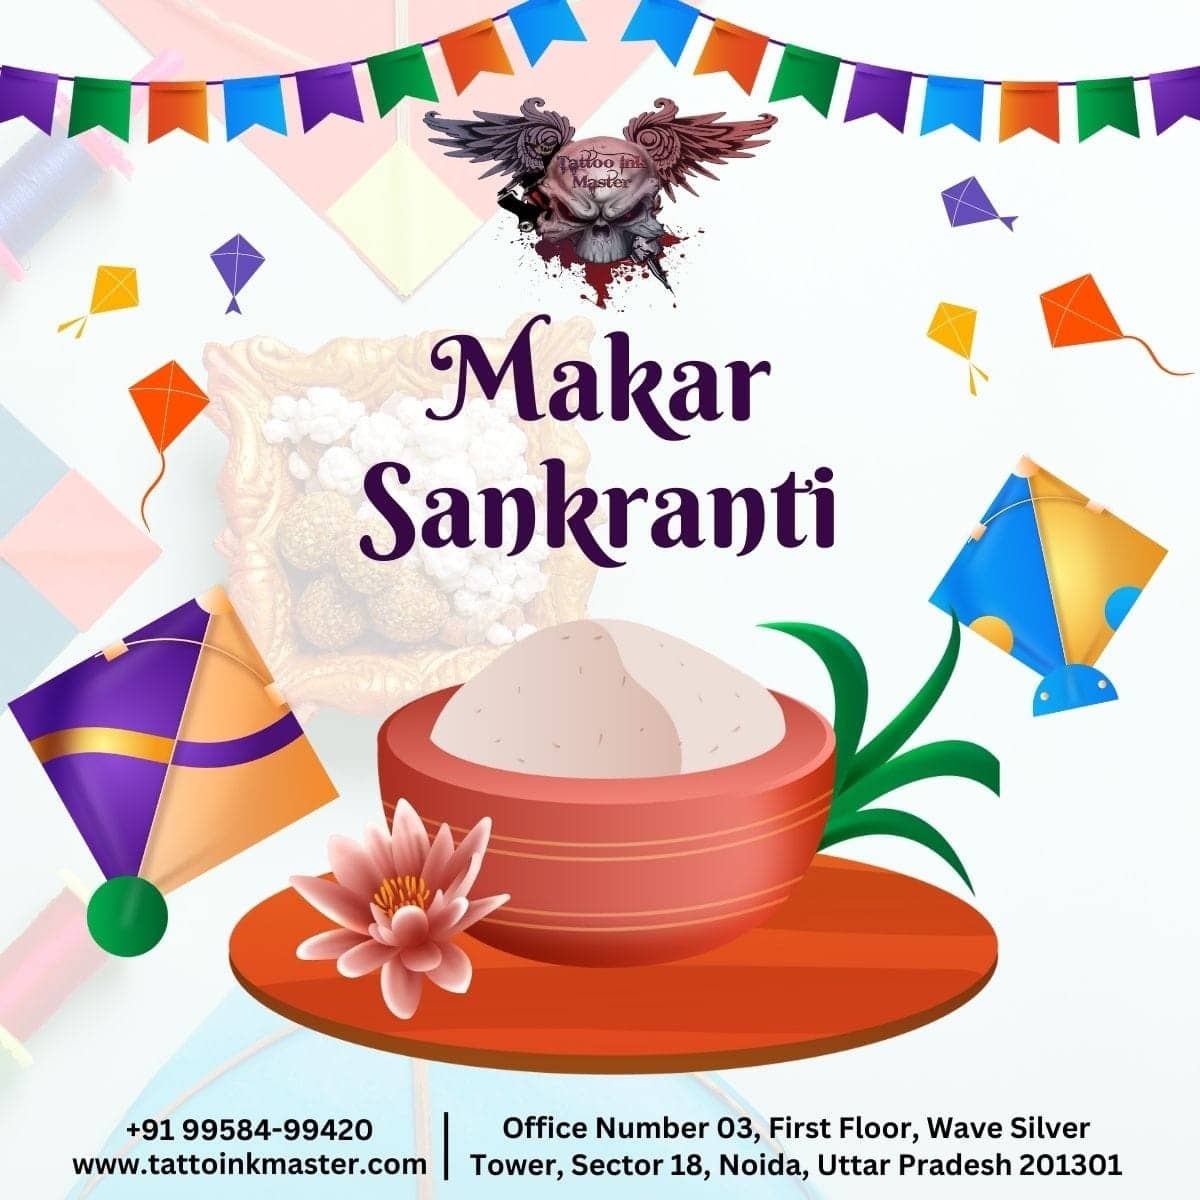 You are currently viewing Wish You A Very Happy Makar Sankranti